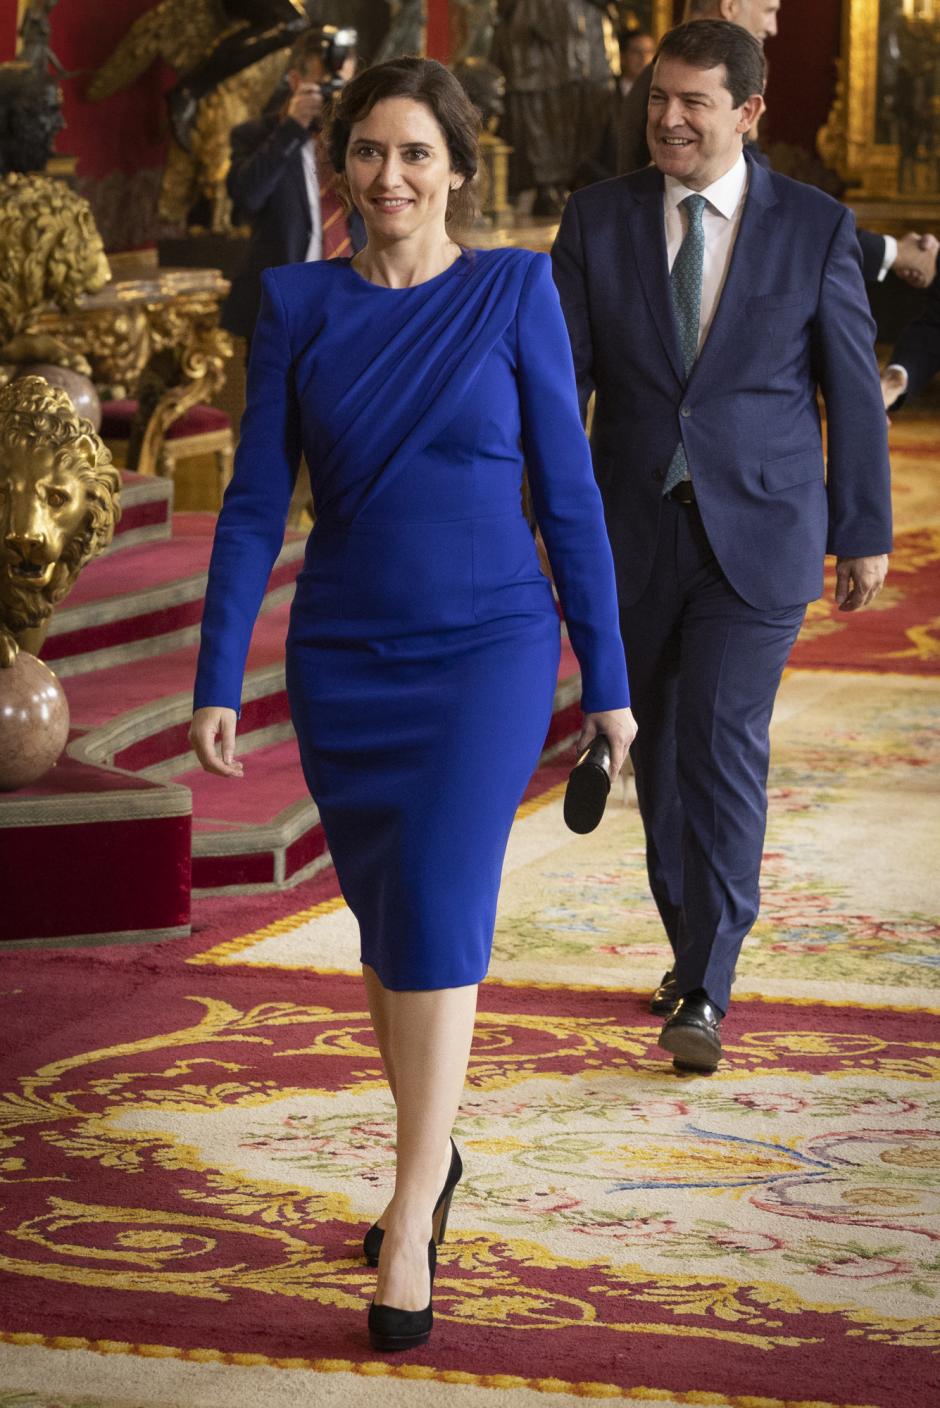 Politician Isabel Diaz Ayuso attending a reception at RoyalPalace during the known as Dia de la Hispanidad, Spain's National Day, in Madrid, on Wednesday 12, October 2022.